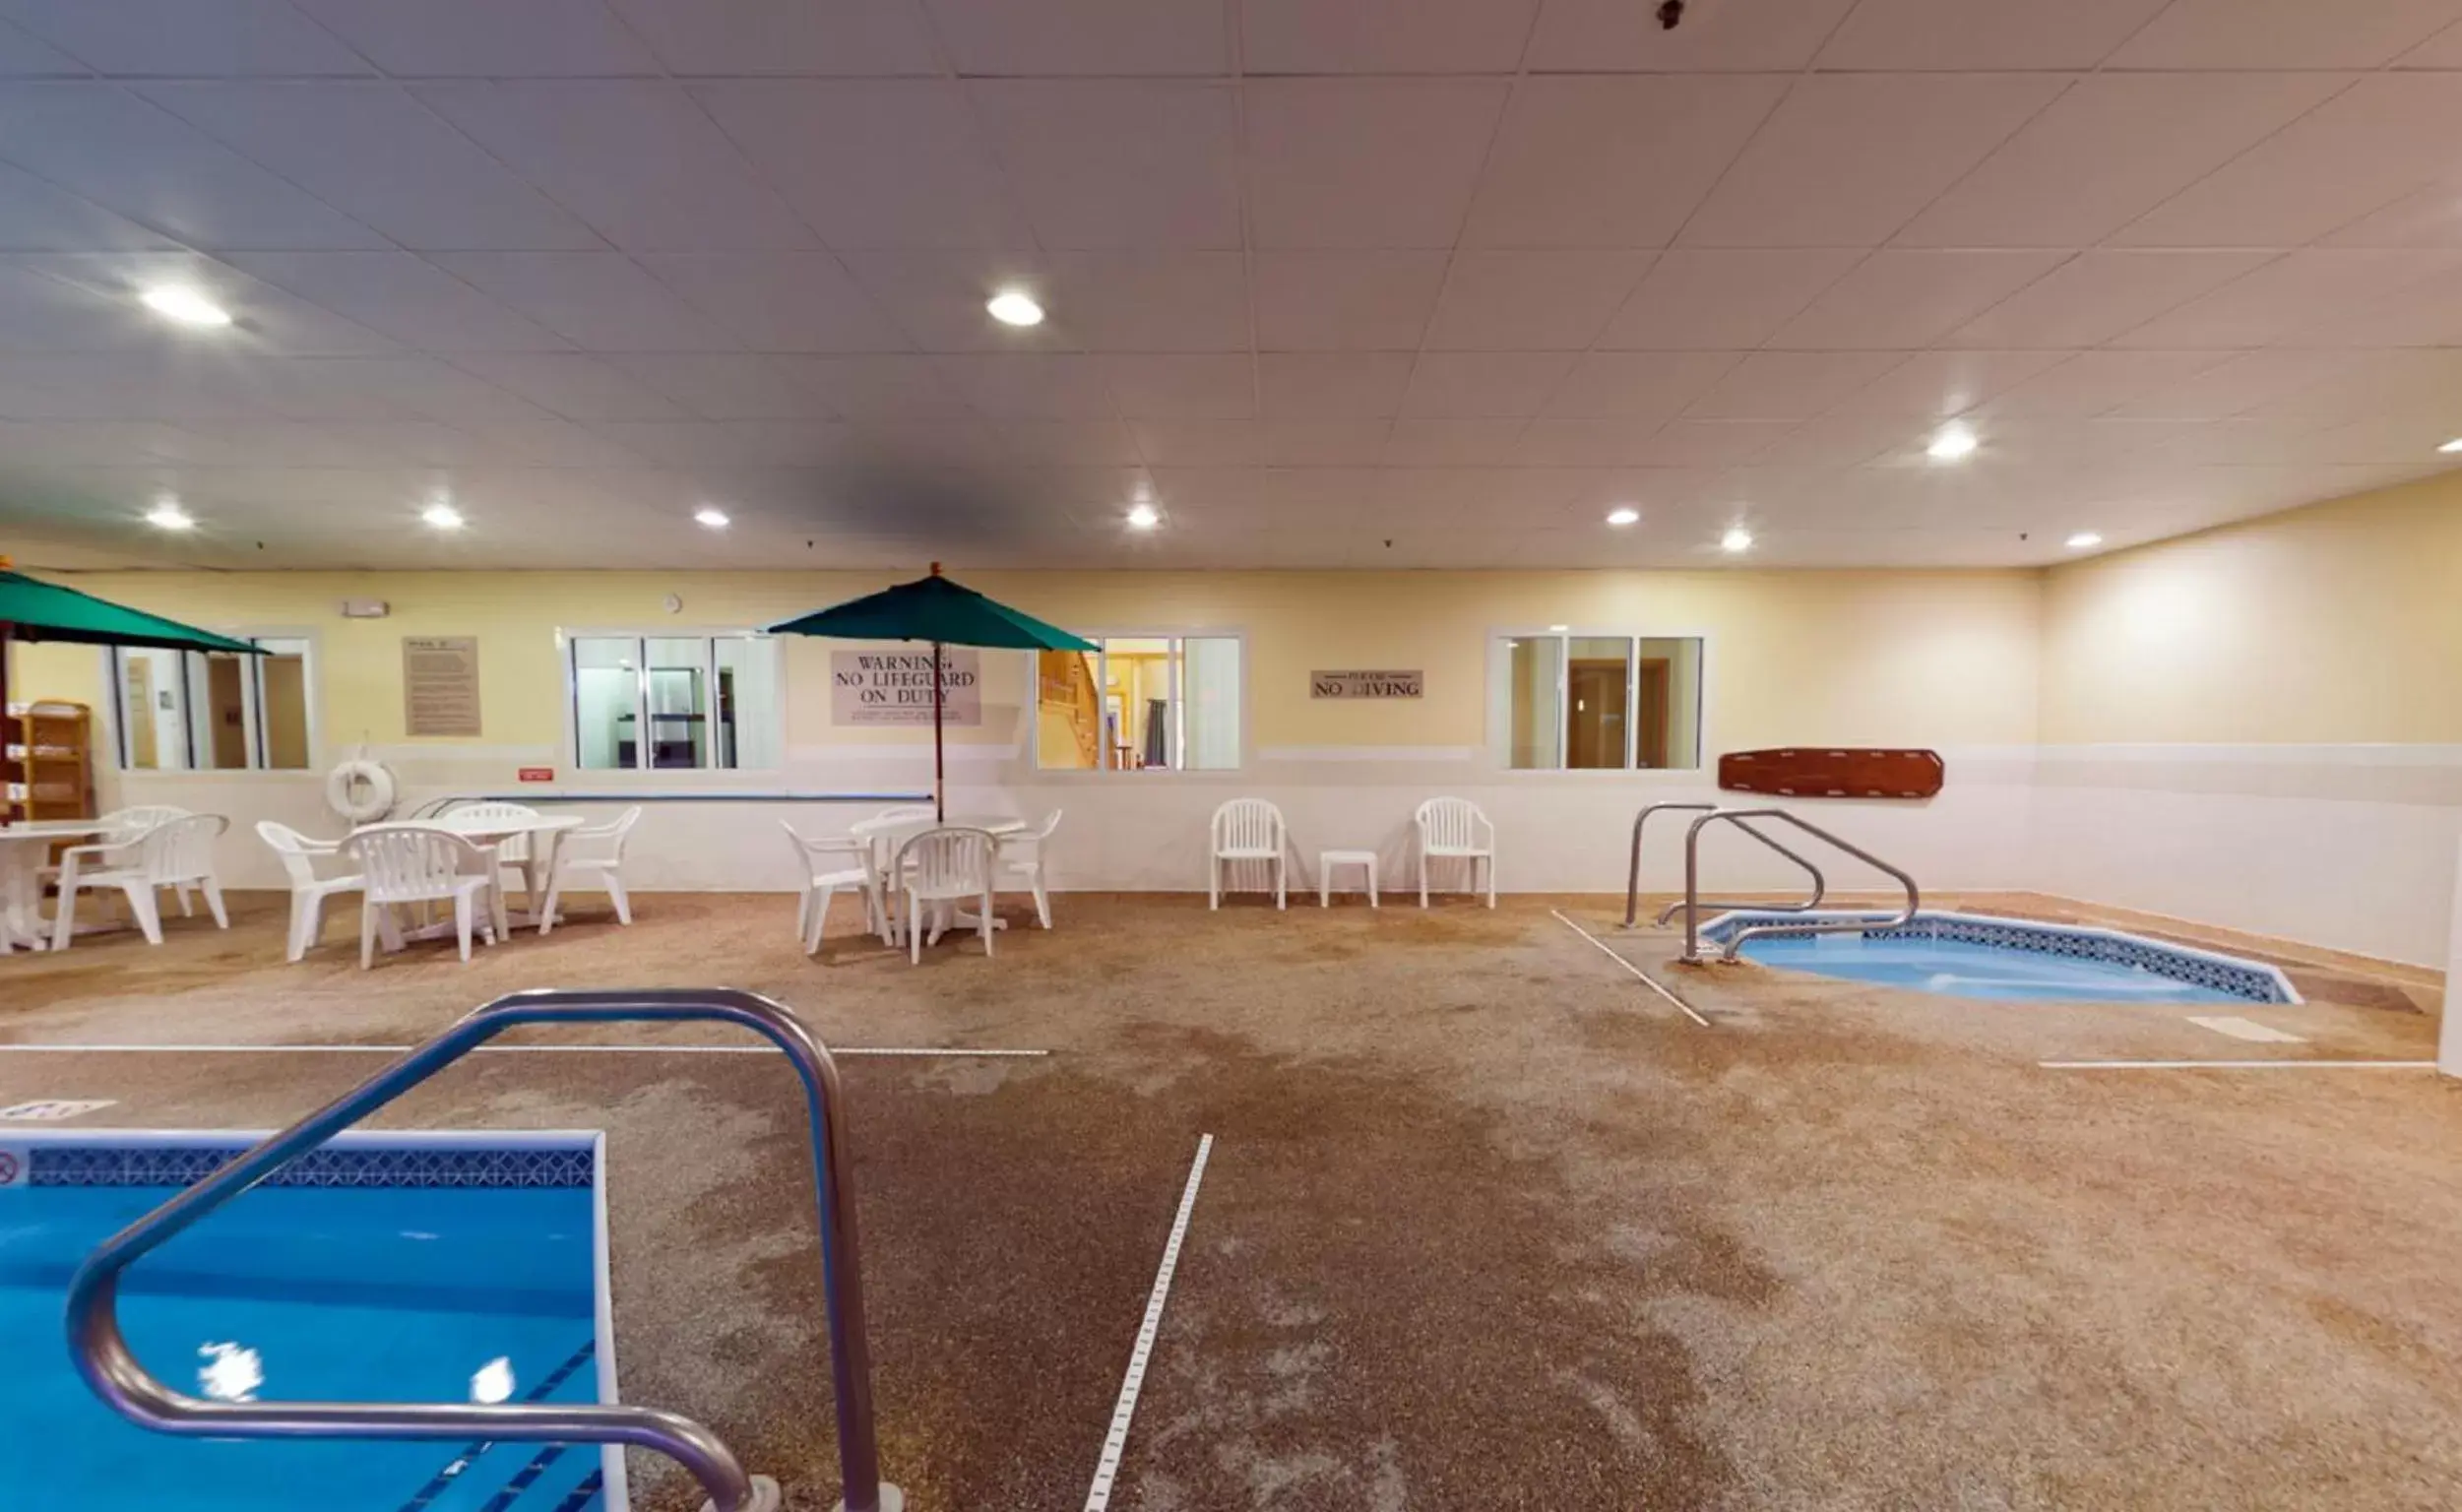 Swimming Pool in Country Inn & Suites by Radisson, Rock Falls, IL